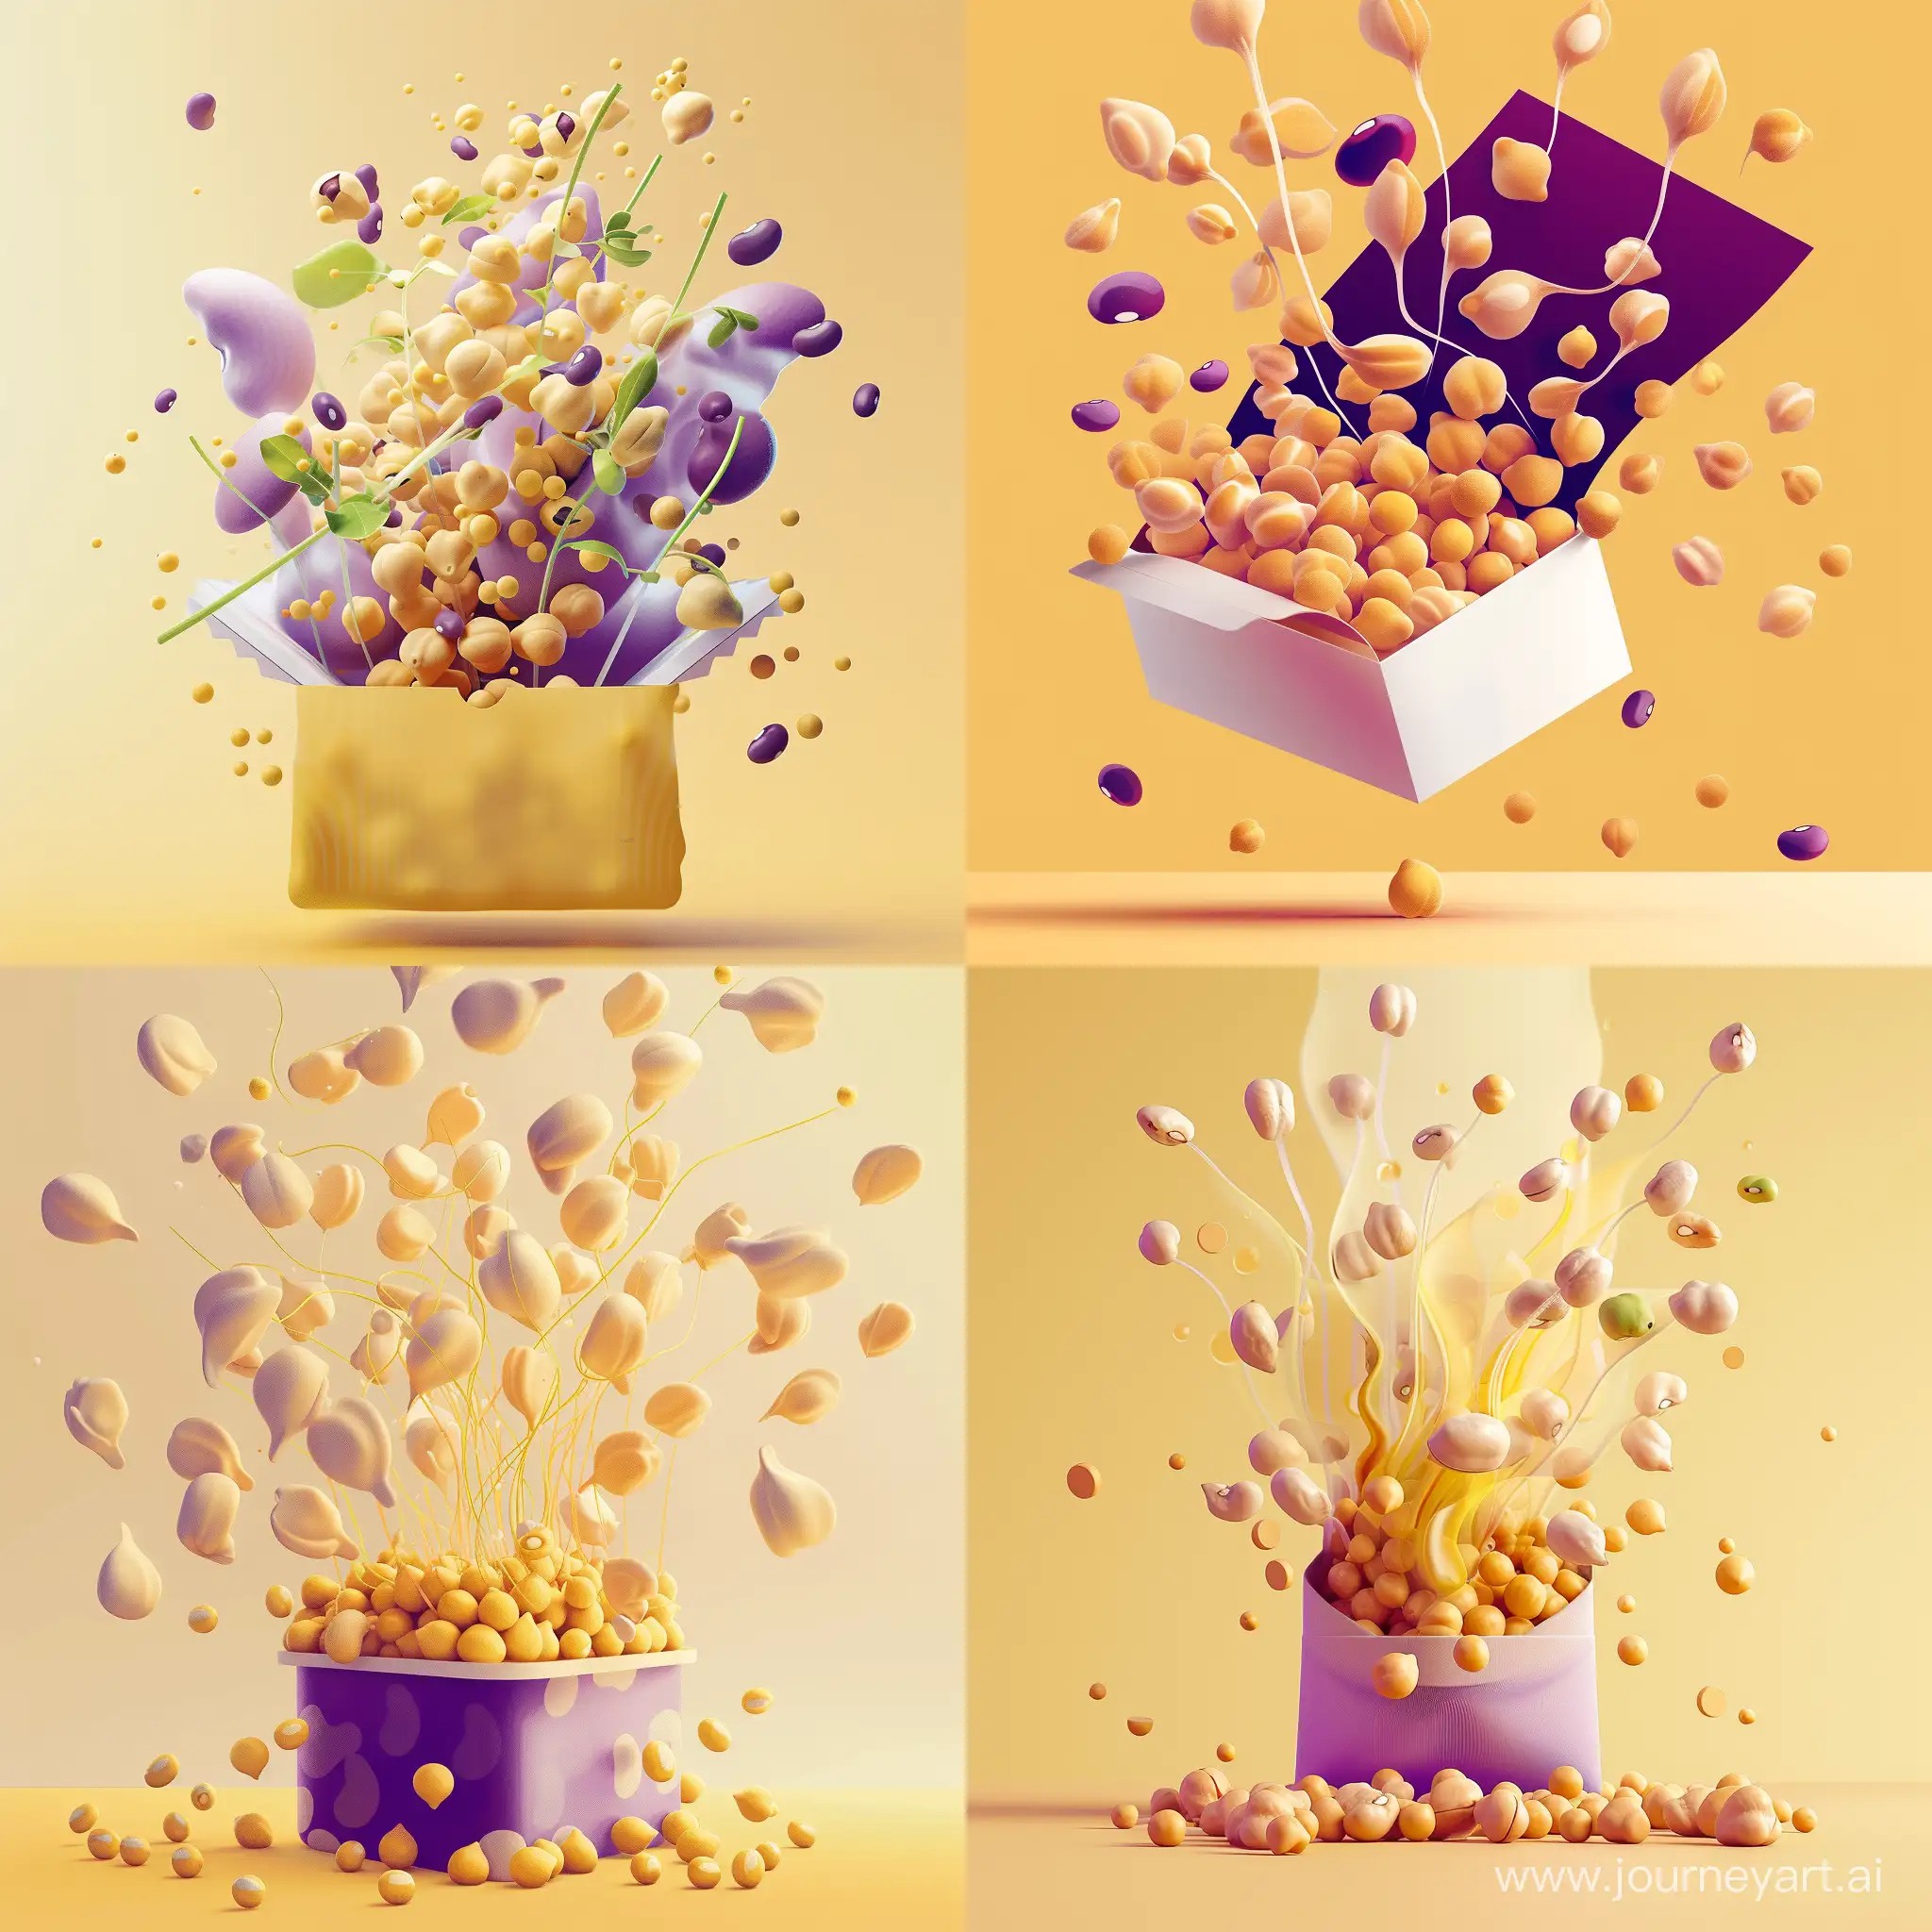 Sprouting-Legumes-Banner-Vibrant-Yellow-and-Purple-Theme